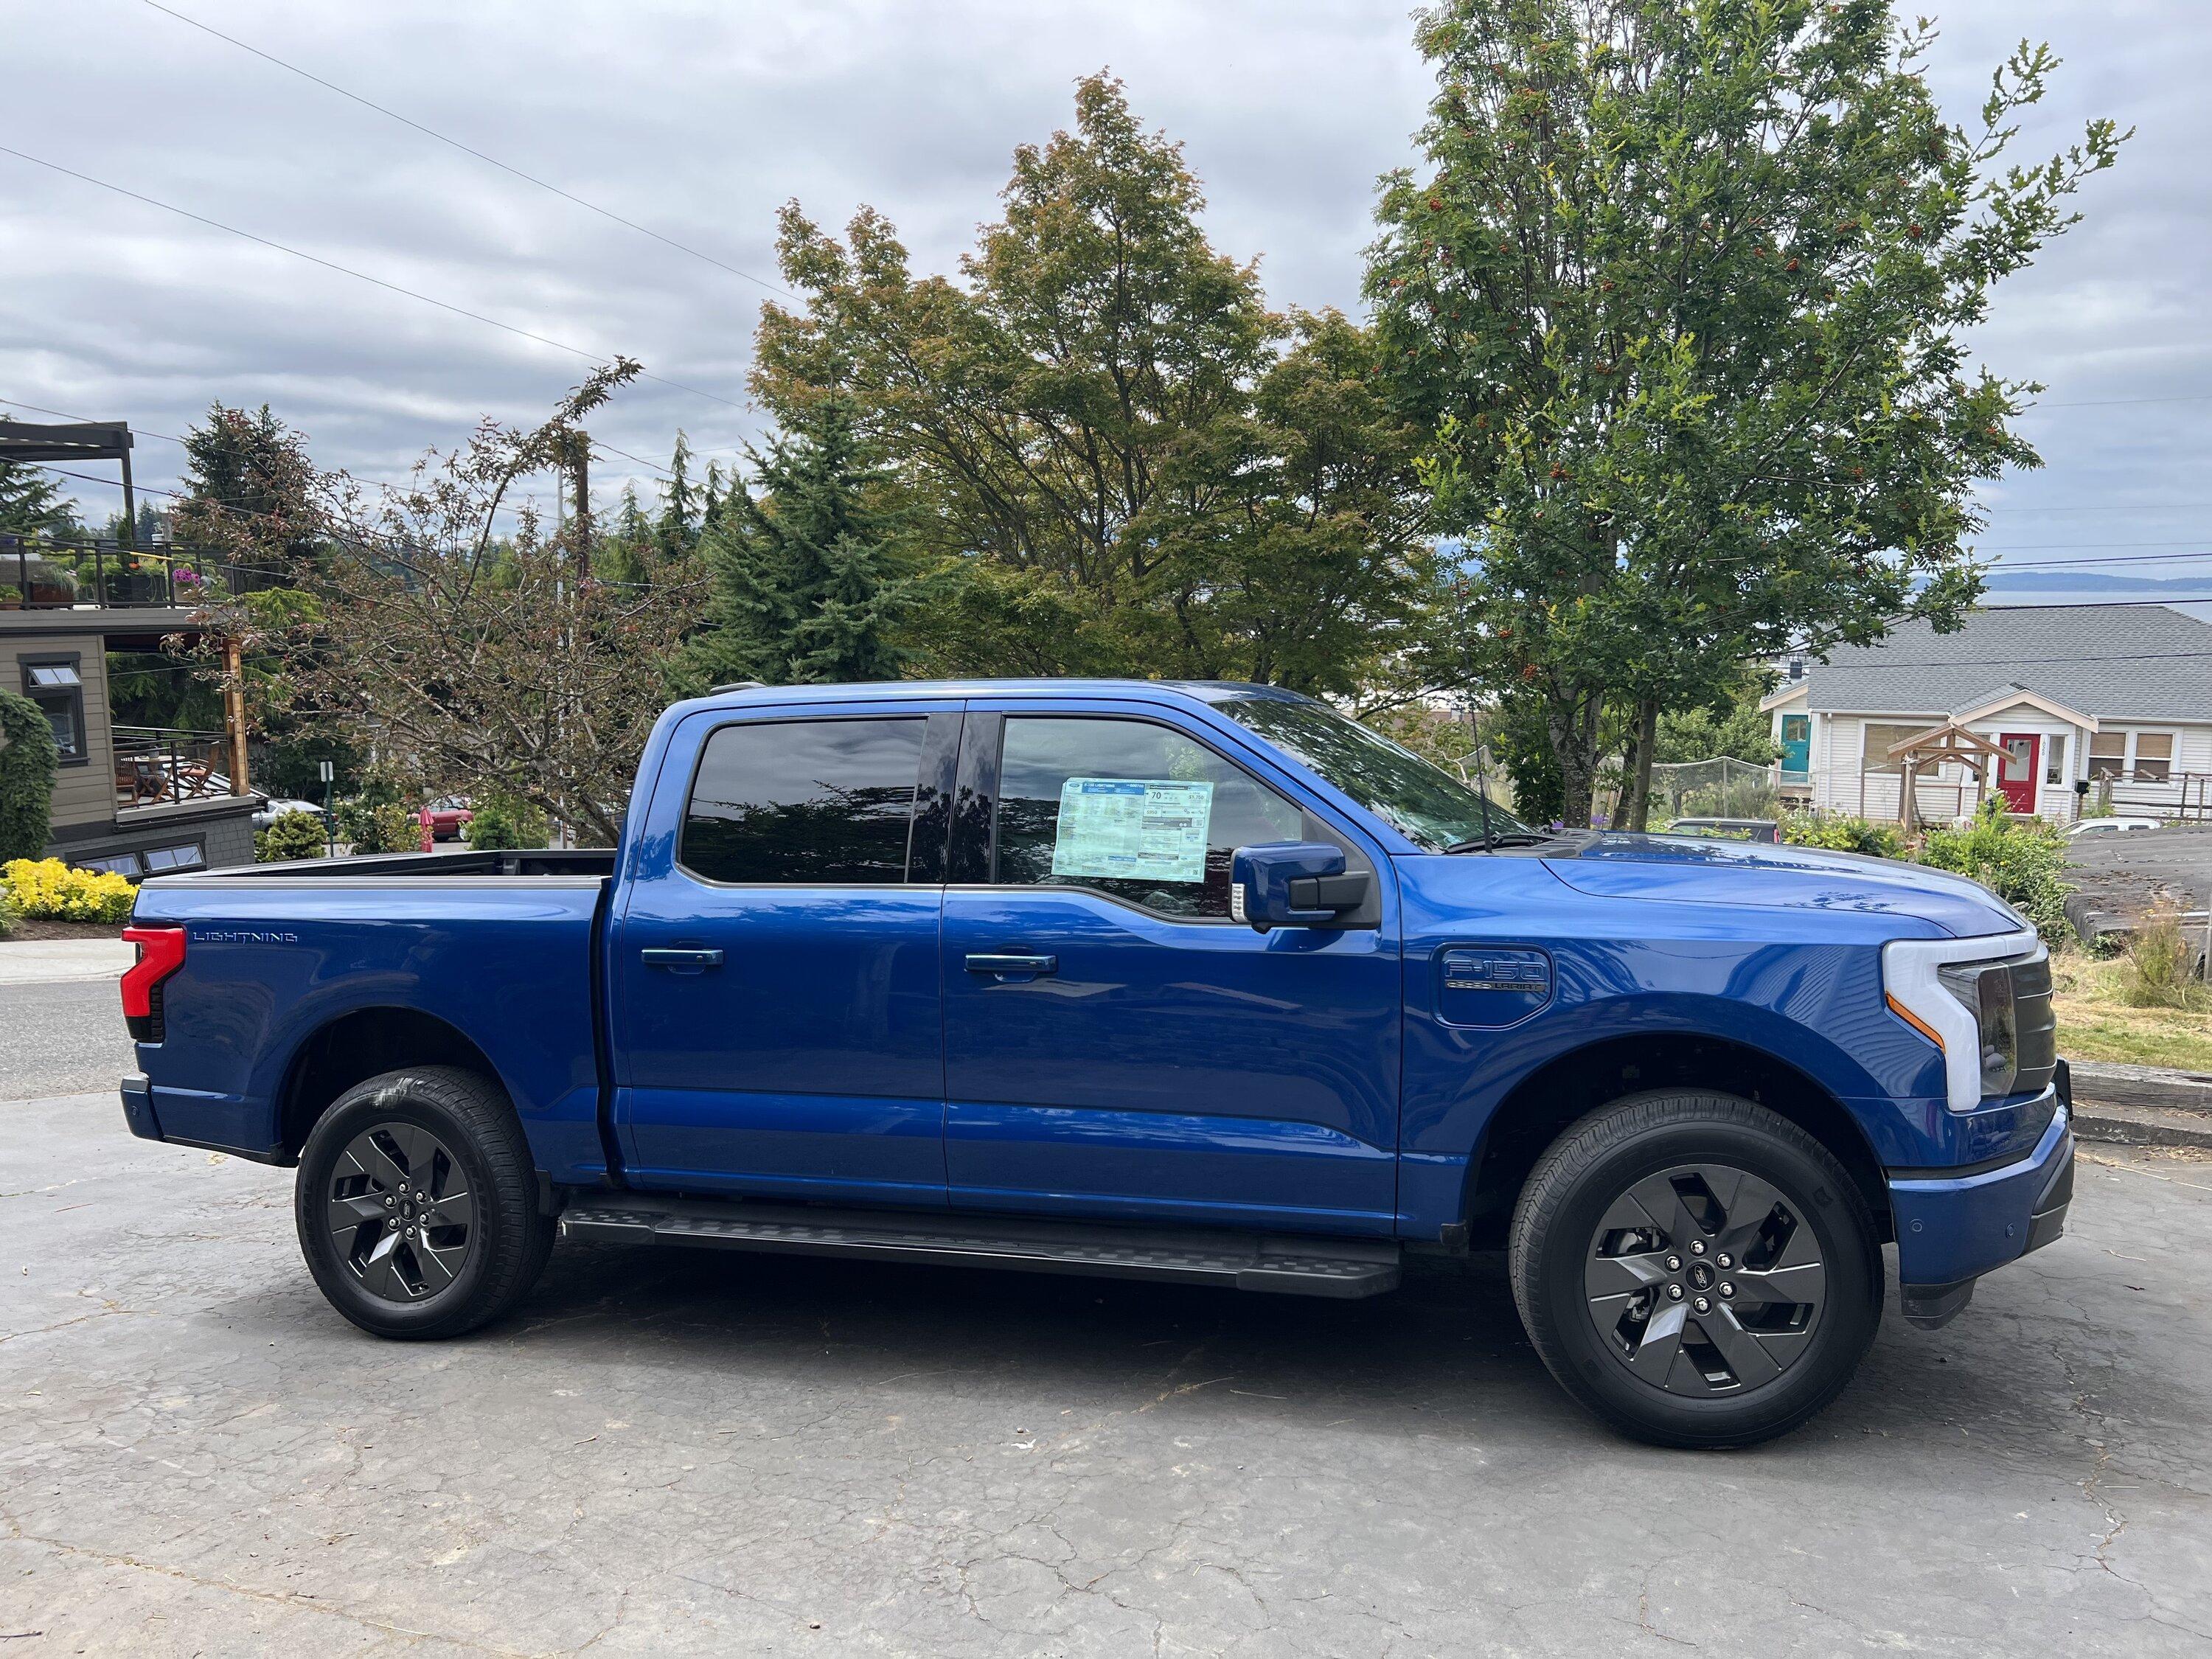 Ford F-150 Lightning My thoughts: Lariat Test Drive, showroom Pro f150 at home